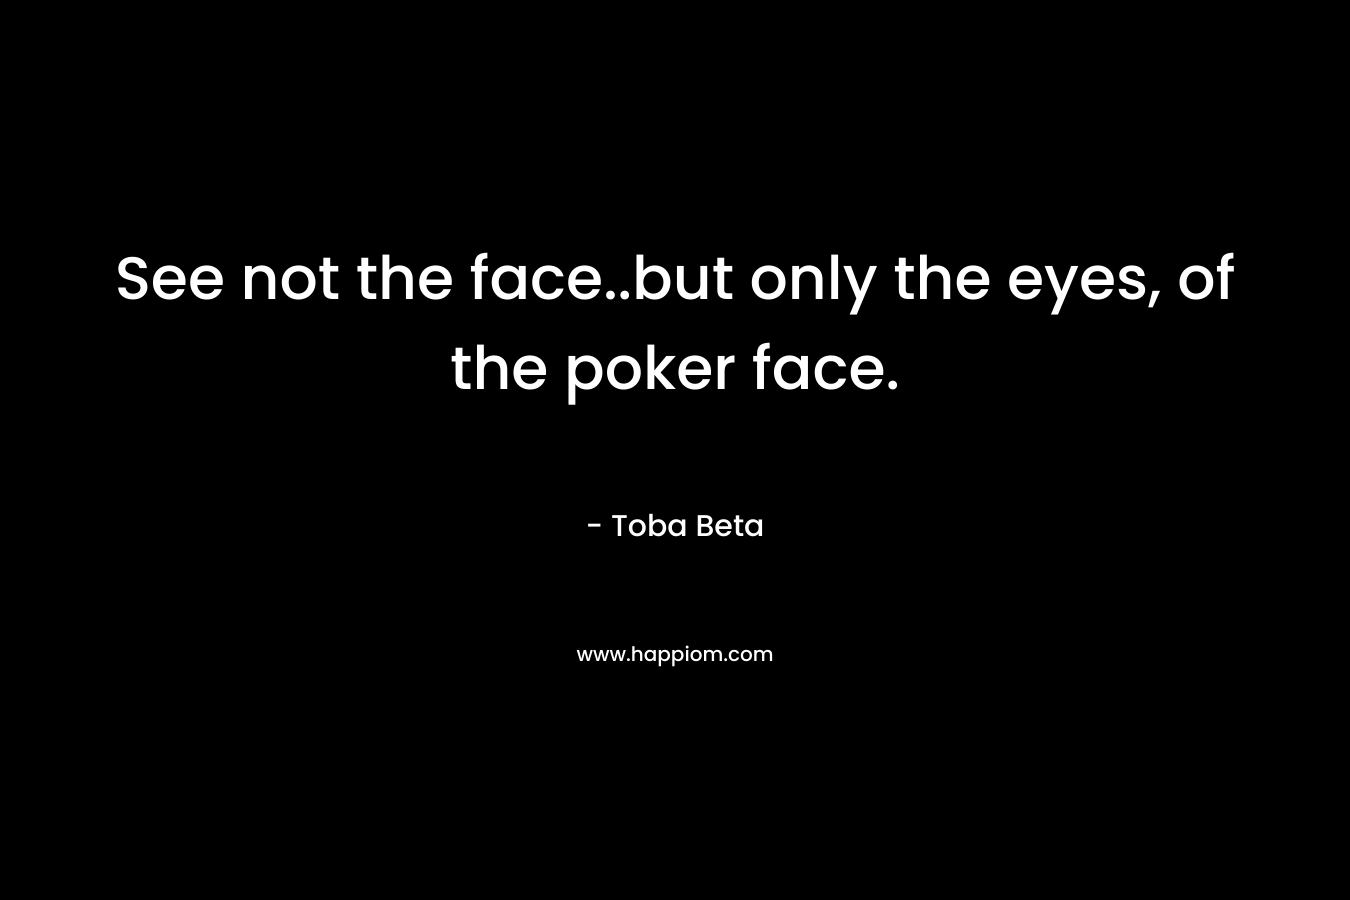 See not the face..but only the eyes, of the poker face.